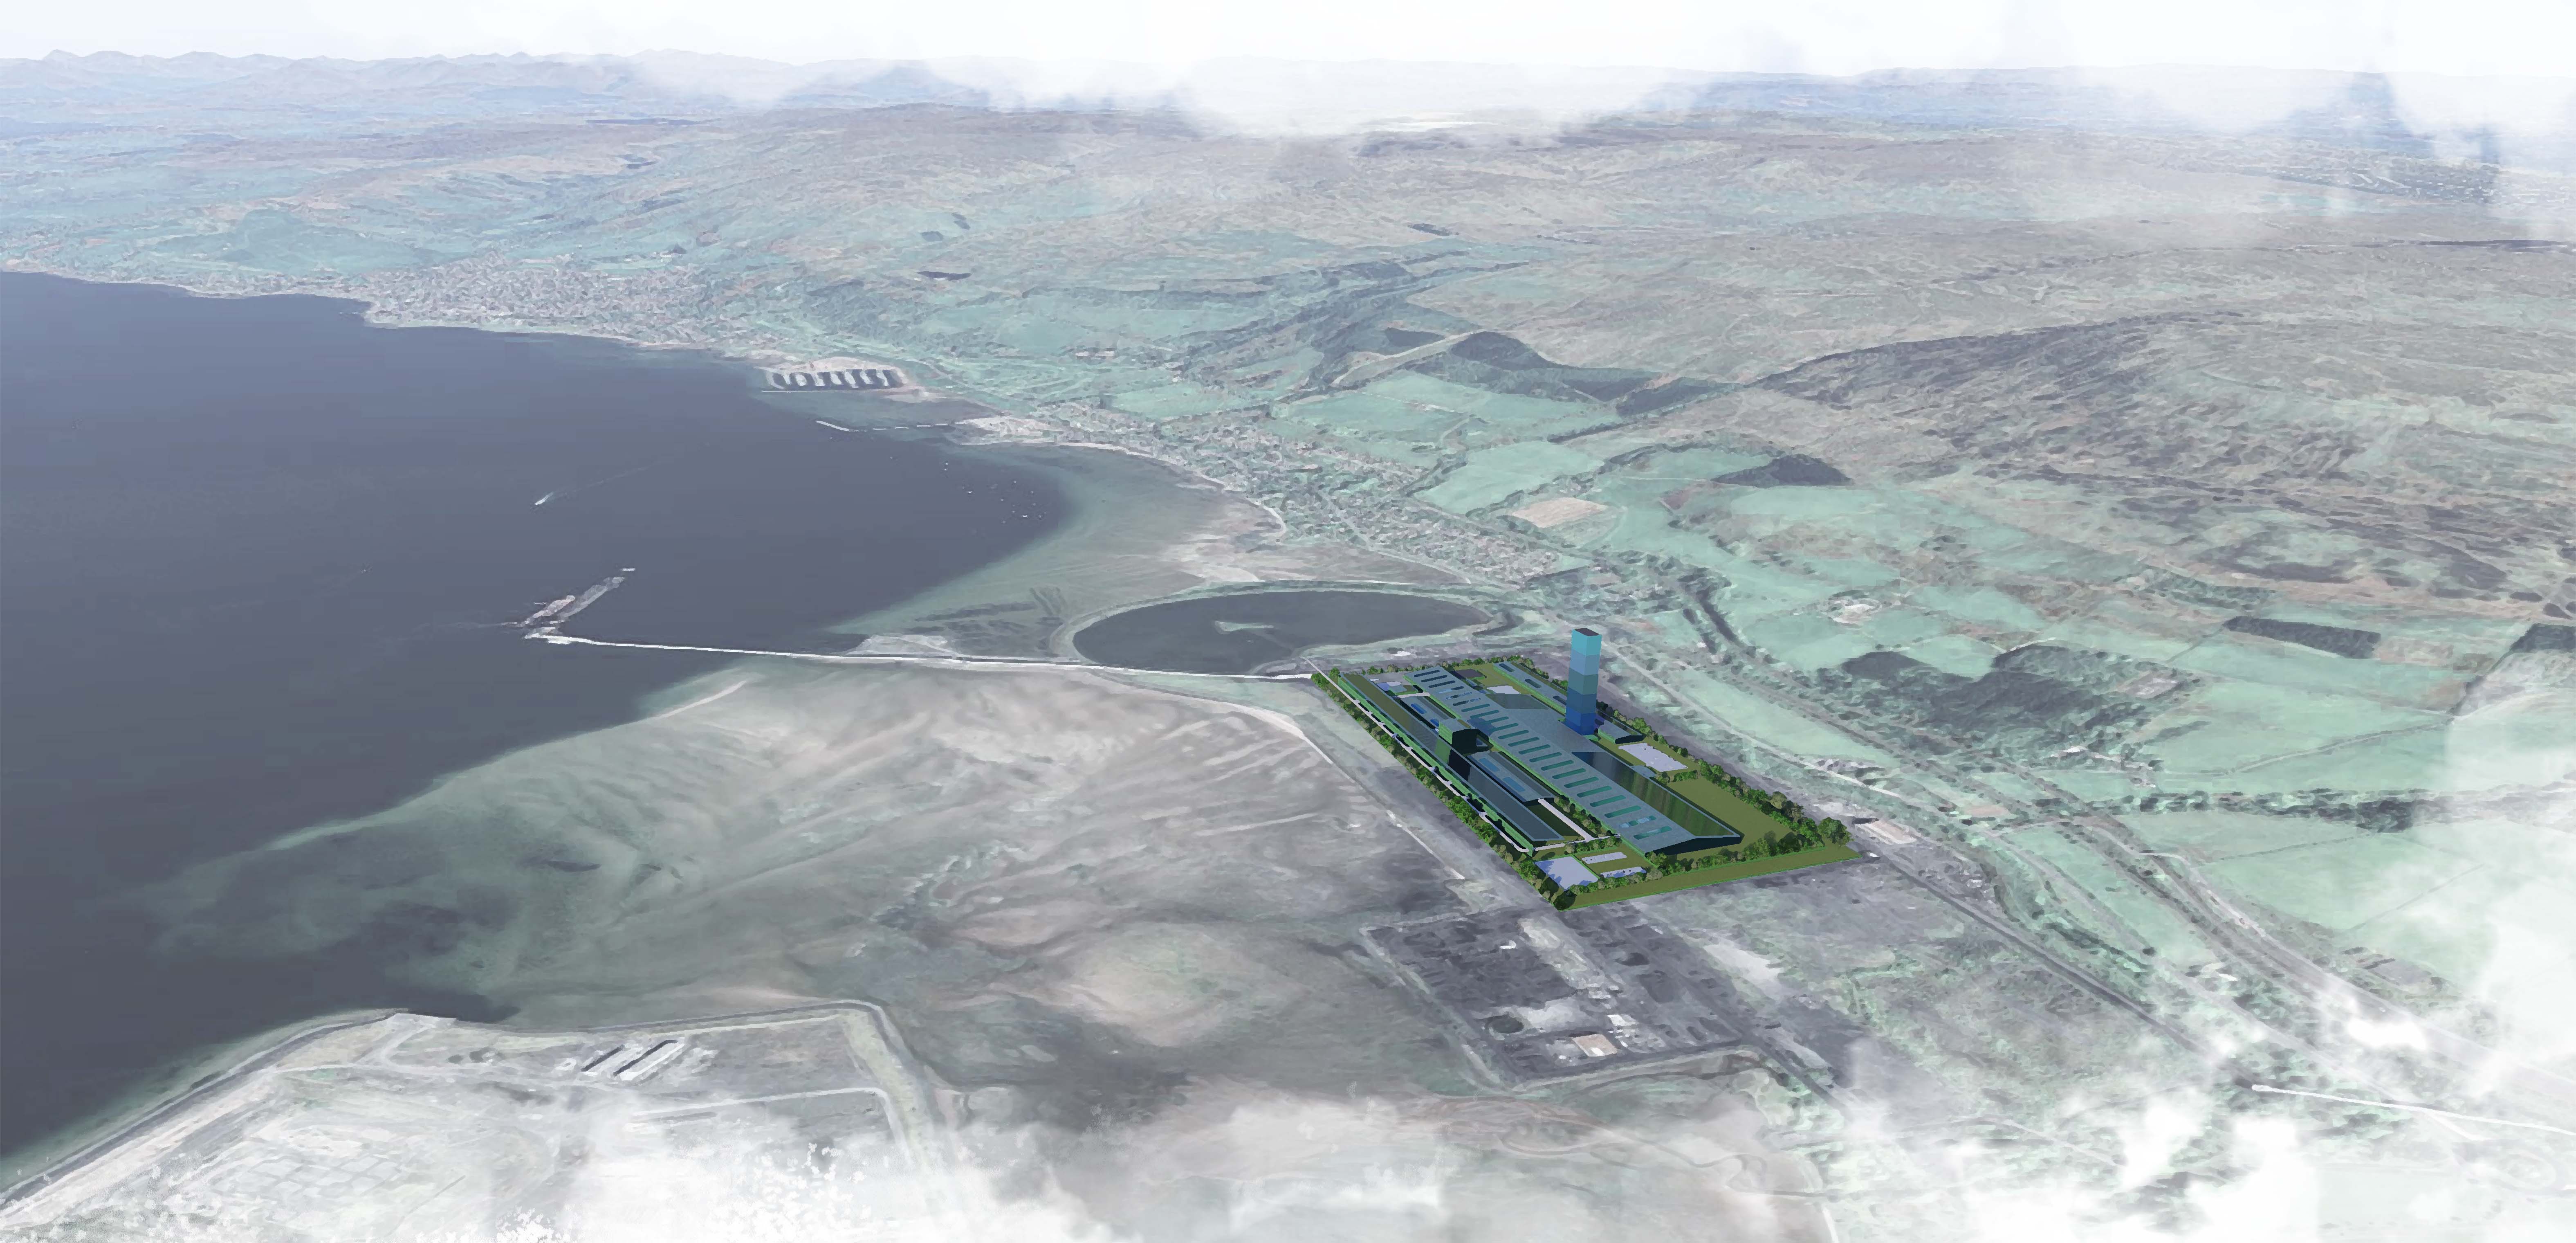 XLCC obtains planning approval to build UK’s first HVDC cable factory in North Ayrshire 